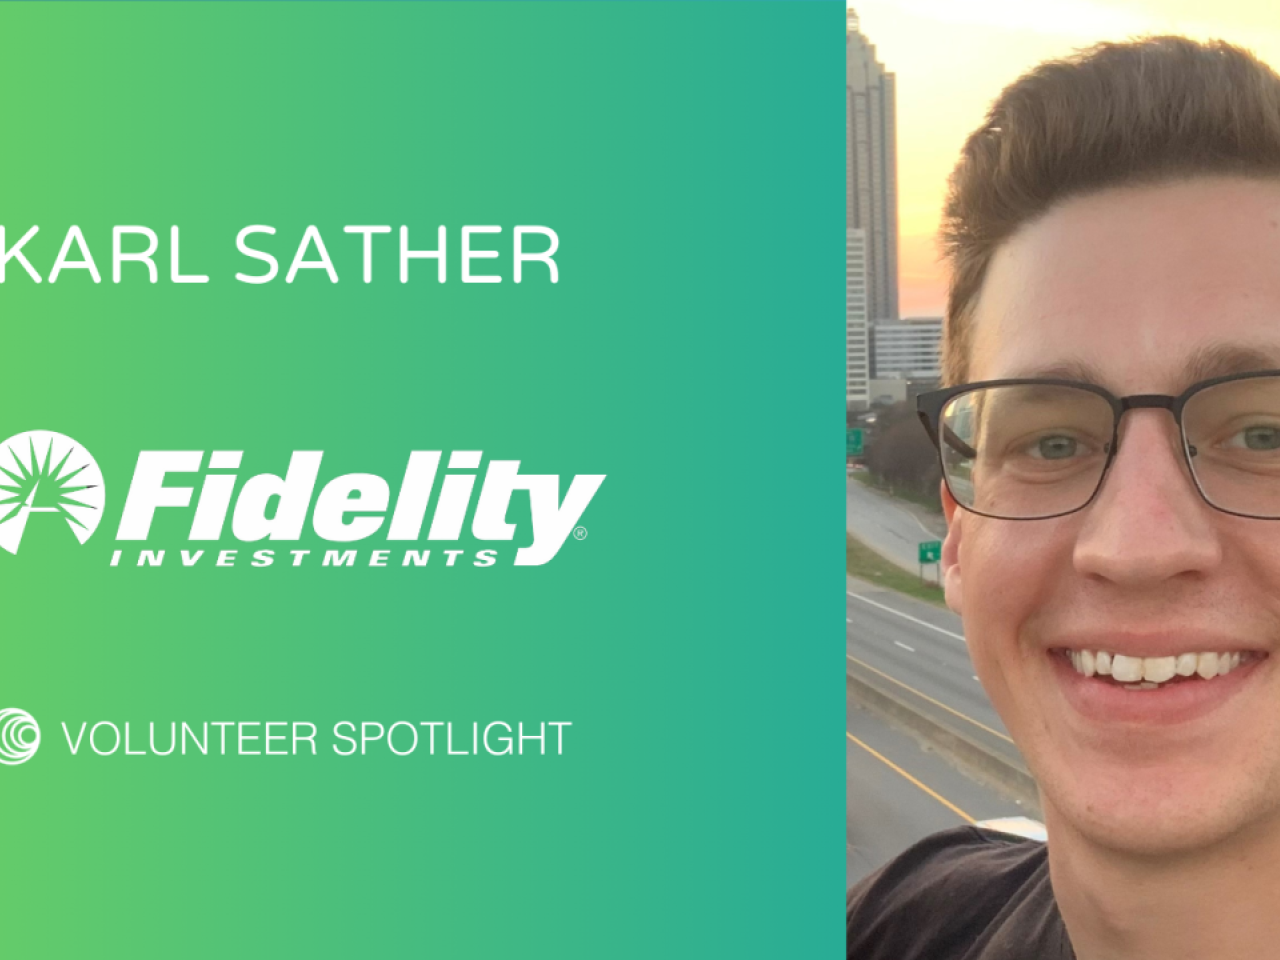 Karl Sather from Fidelity Investments